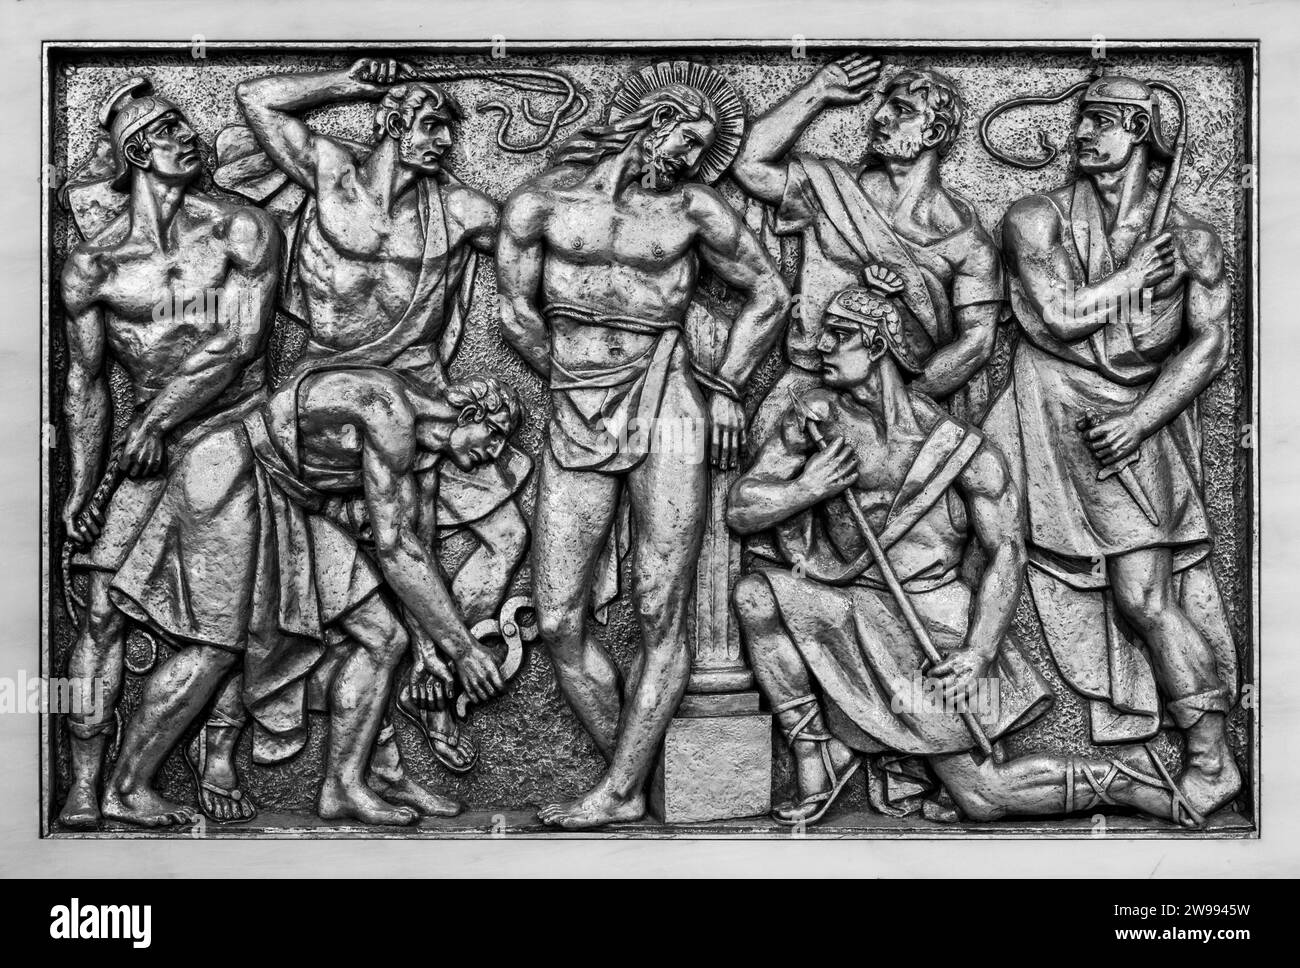 The Scourging at the Pillar – Second Sorrowful Mystery. A relief sculpture in the Basilica of Our Lady of the Rosary of Fatima in Fatima, Portugal. Stock Photo